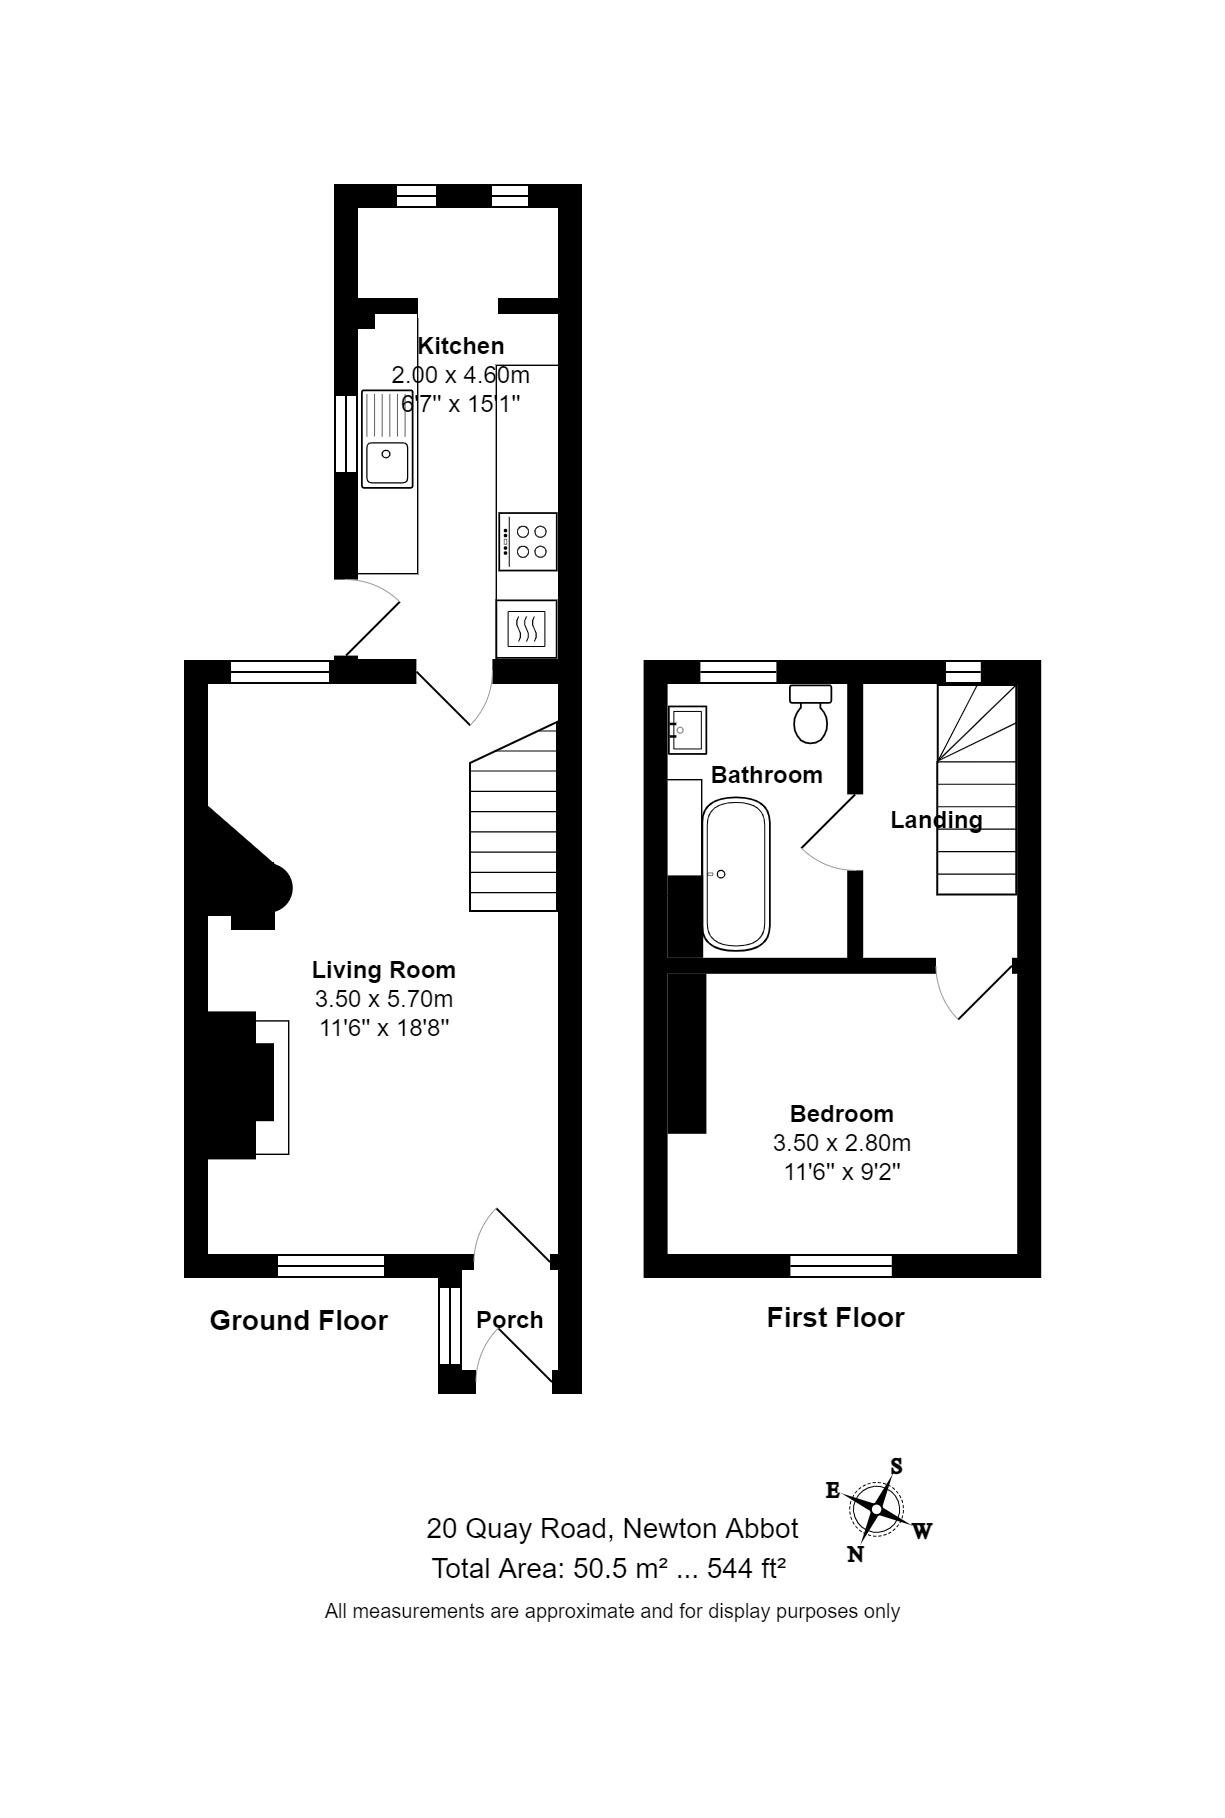 1 bed terraced house for sale in Quay Road, Newton Abbot - Property floorplan